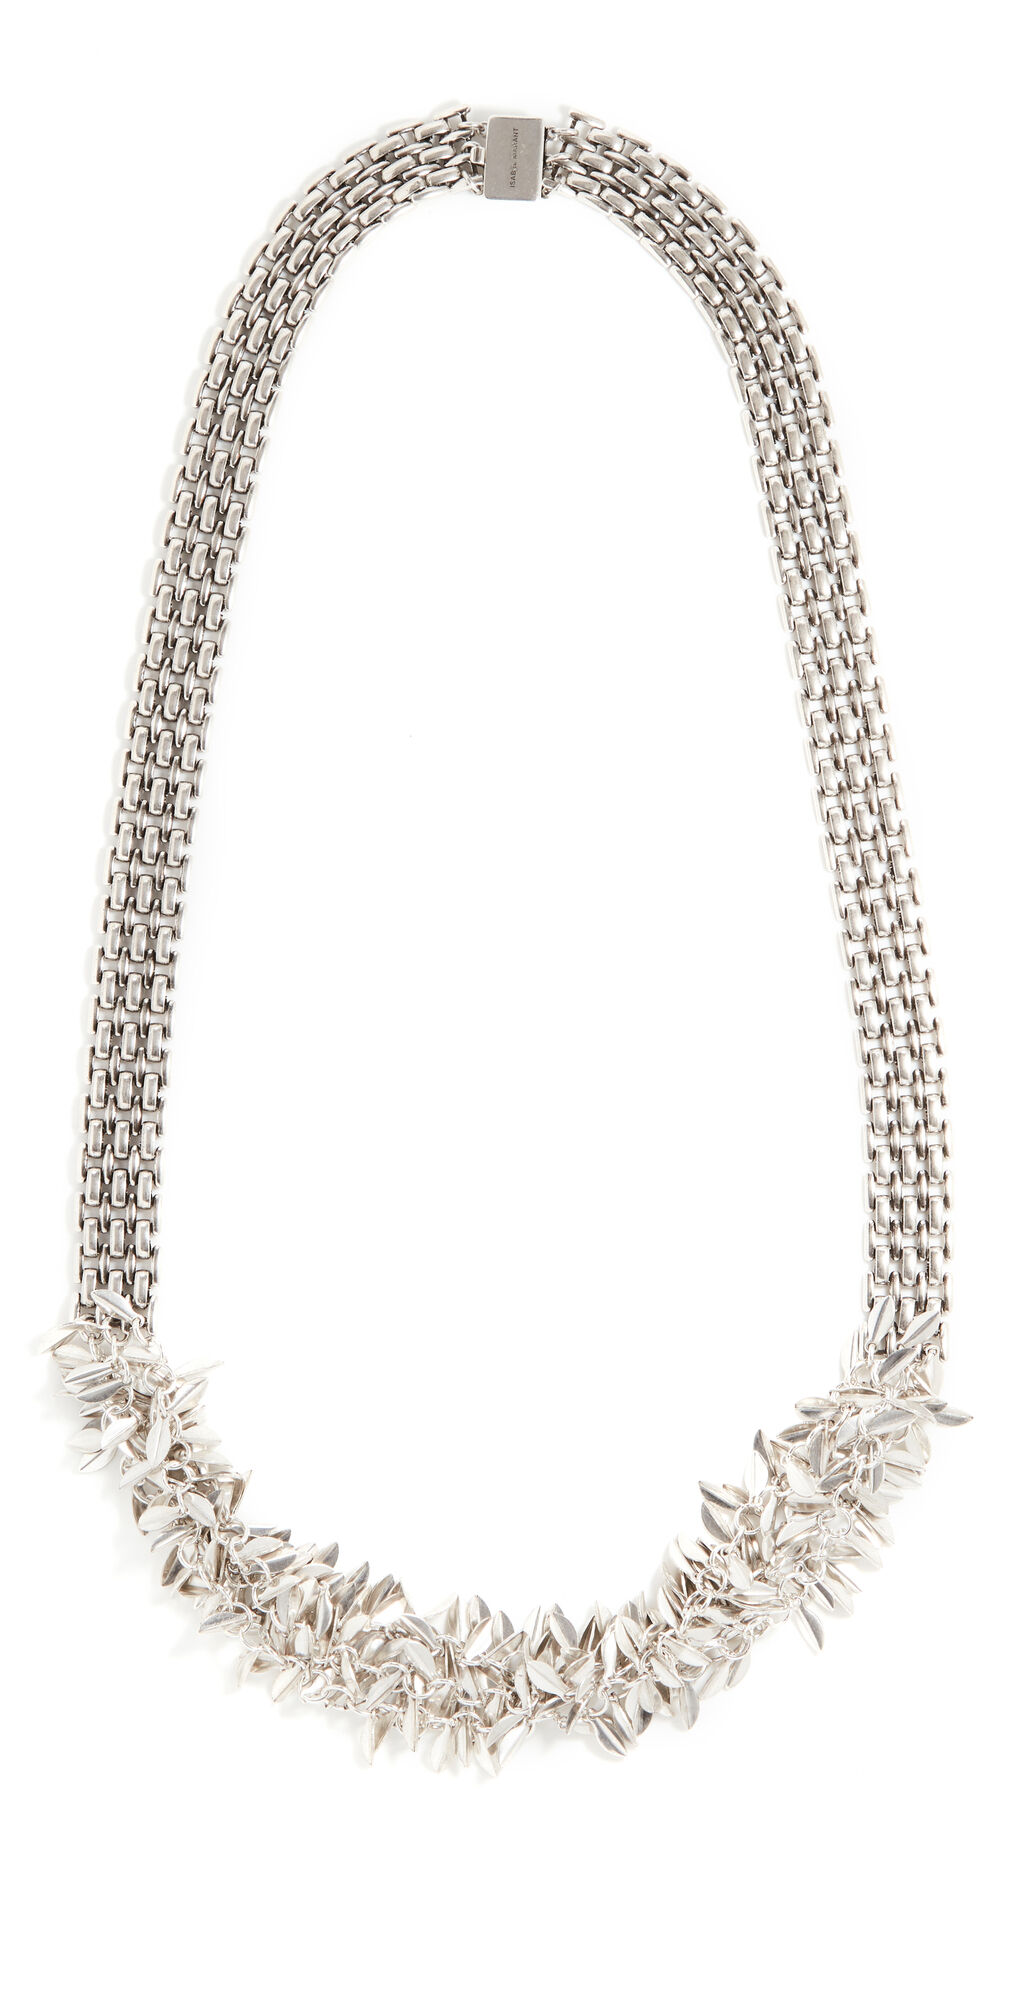 Isabel Marant Leaf Necklace Silver One Size  Silver  size:One Size